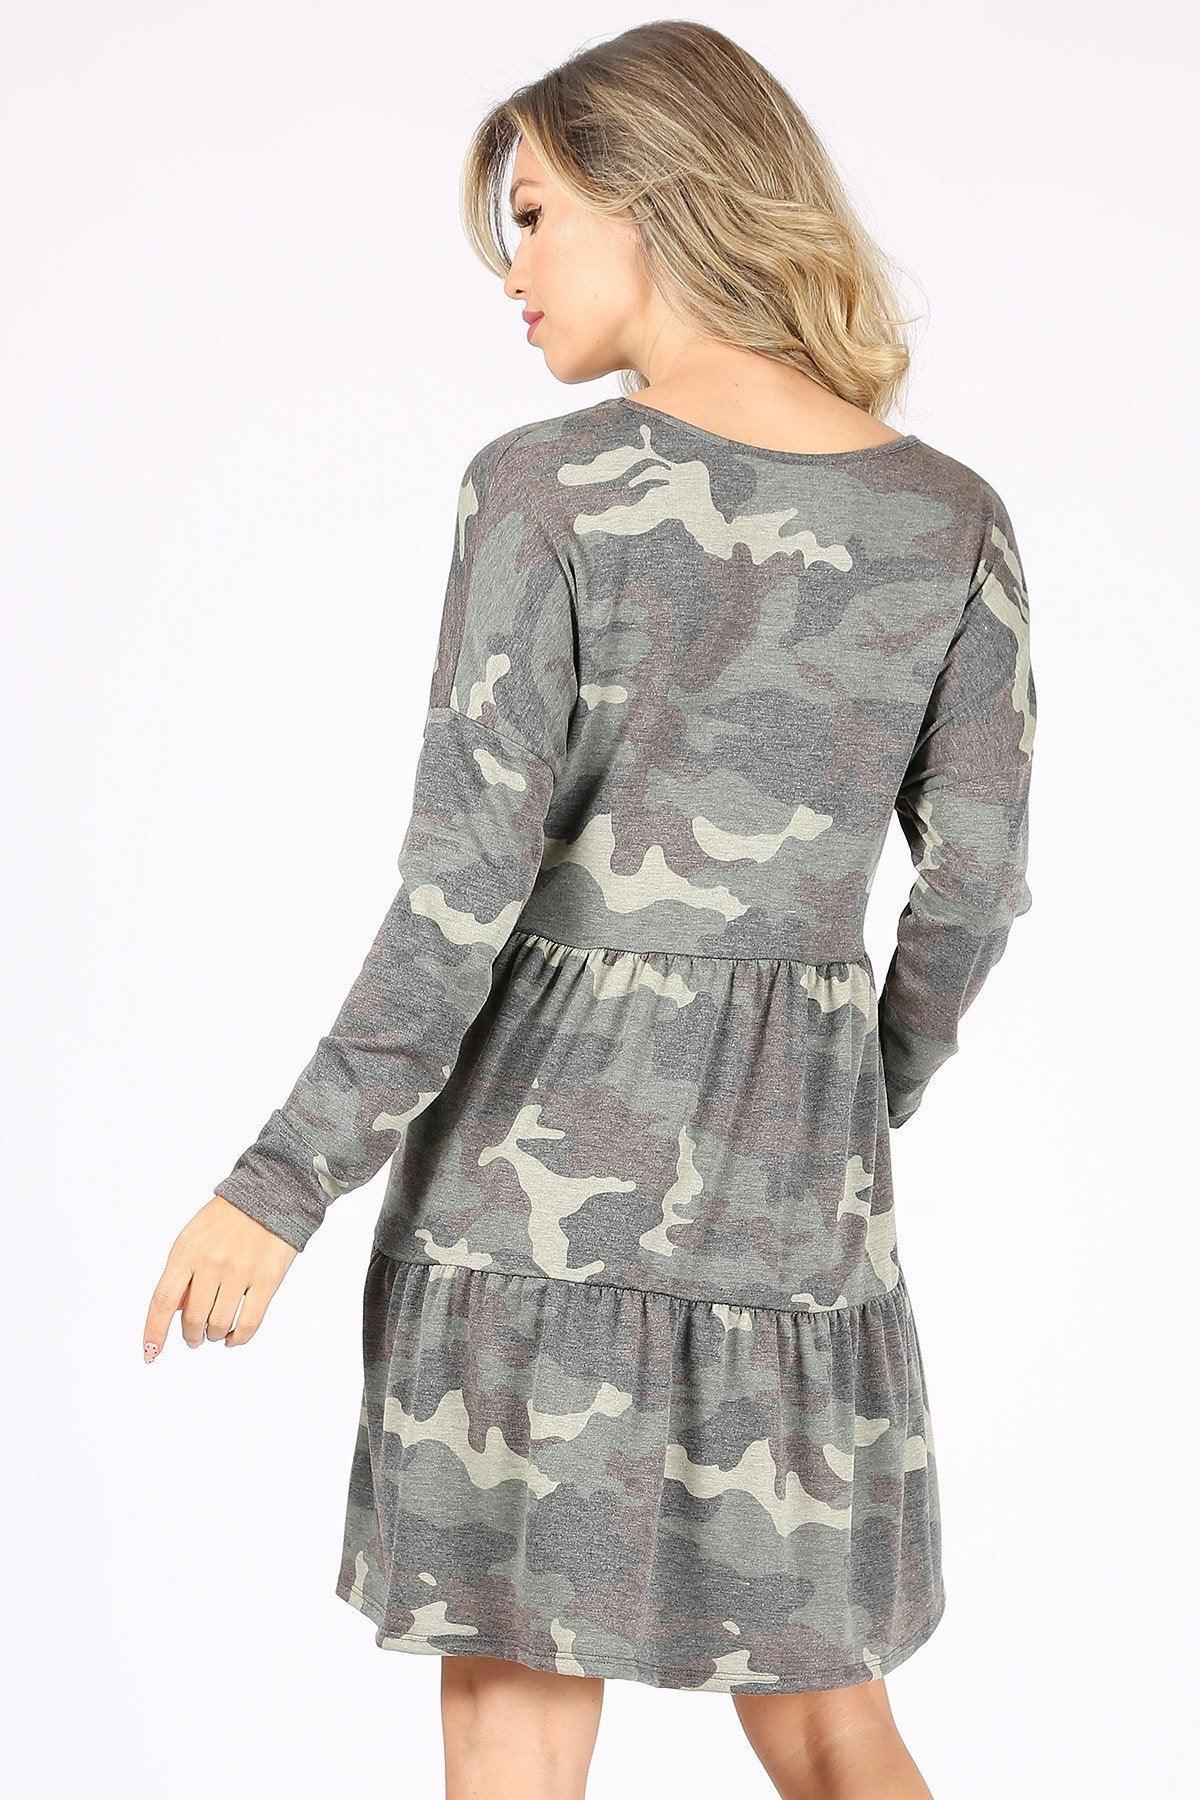 Tiered Camo Dress - Strawberry Moon Boutique